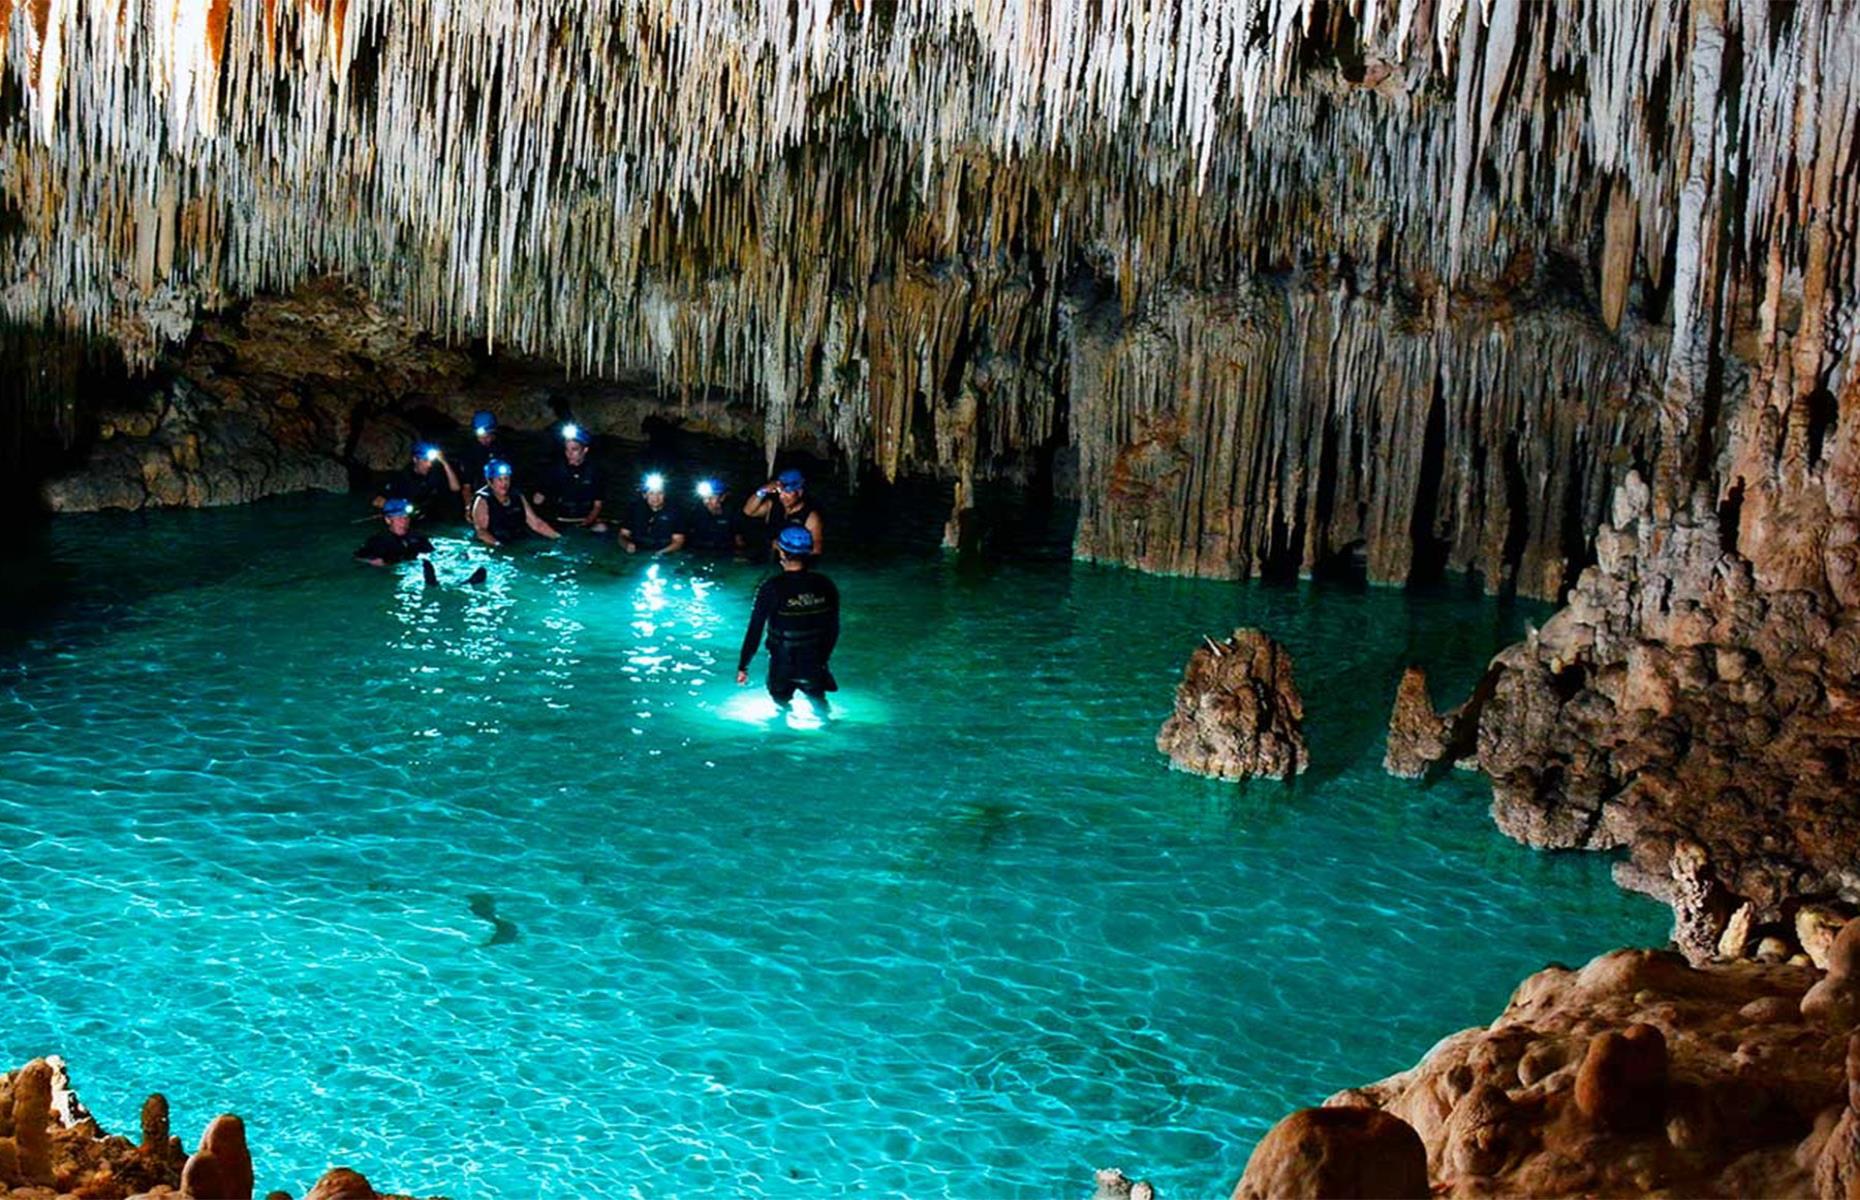 <p>Wade through turquoise rivers and wonder at the dramatic stalactites and stalagmites overhead in this ancient network of caves. Rio Secreto, meaning secret river, at Playa del Carmen was discovered in 2005 by a farmer who moved some rocks while chasing an iguana. It has since become a popular and highly-rated attraction among visitors. You don’t need to be a strong swimmer to take part and guests are issued with wetsuits and hard hats.</p>